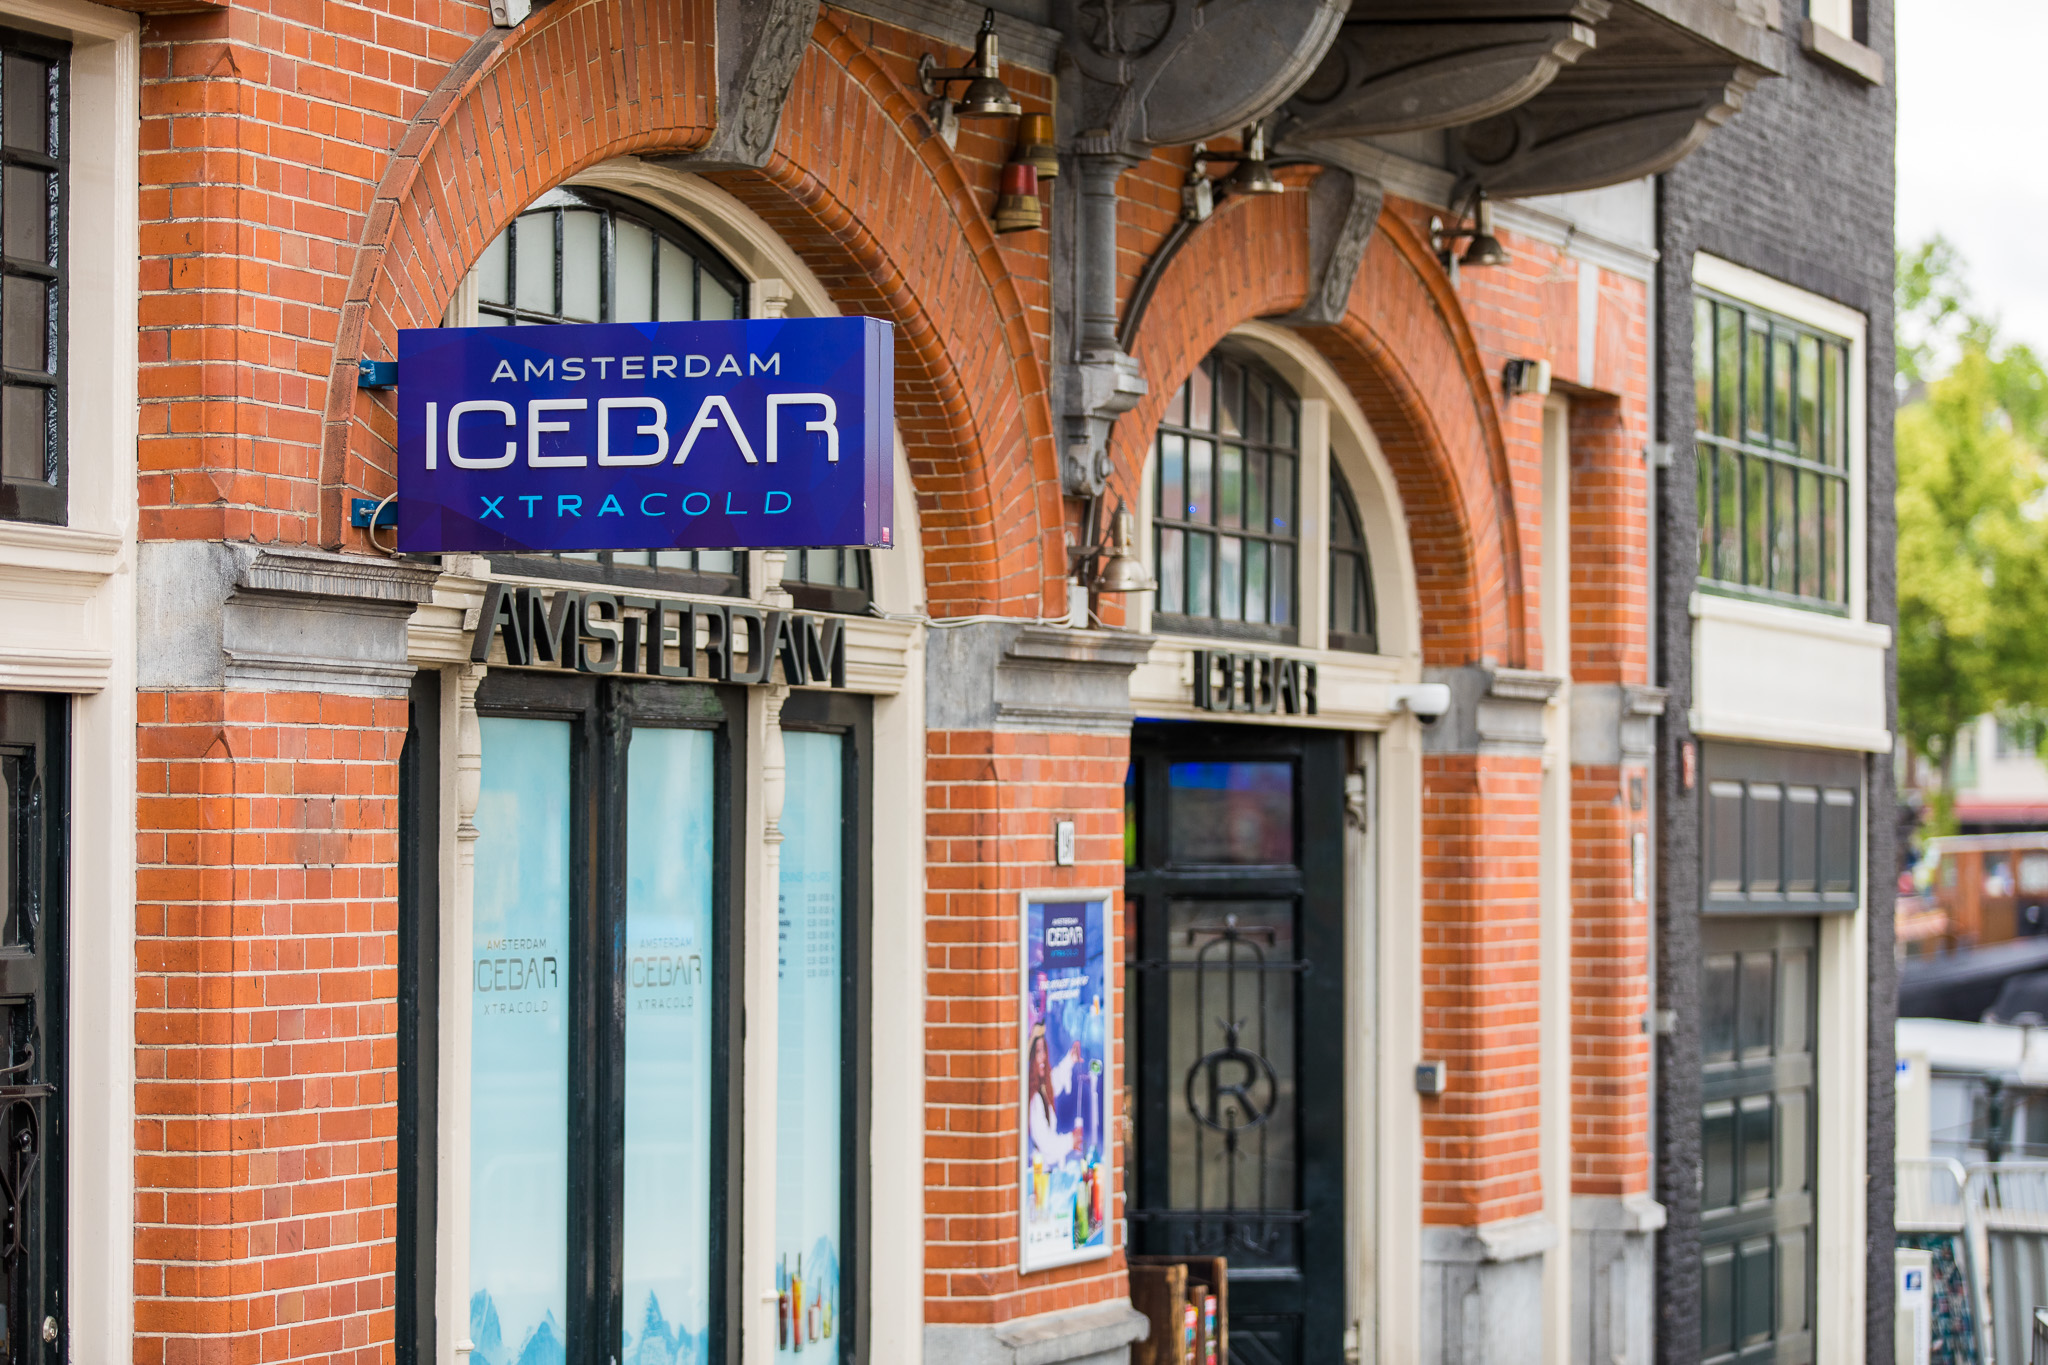 XtraCold Icebar Experience: Skip The Line + 3 free drinks - Amsterdam - 